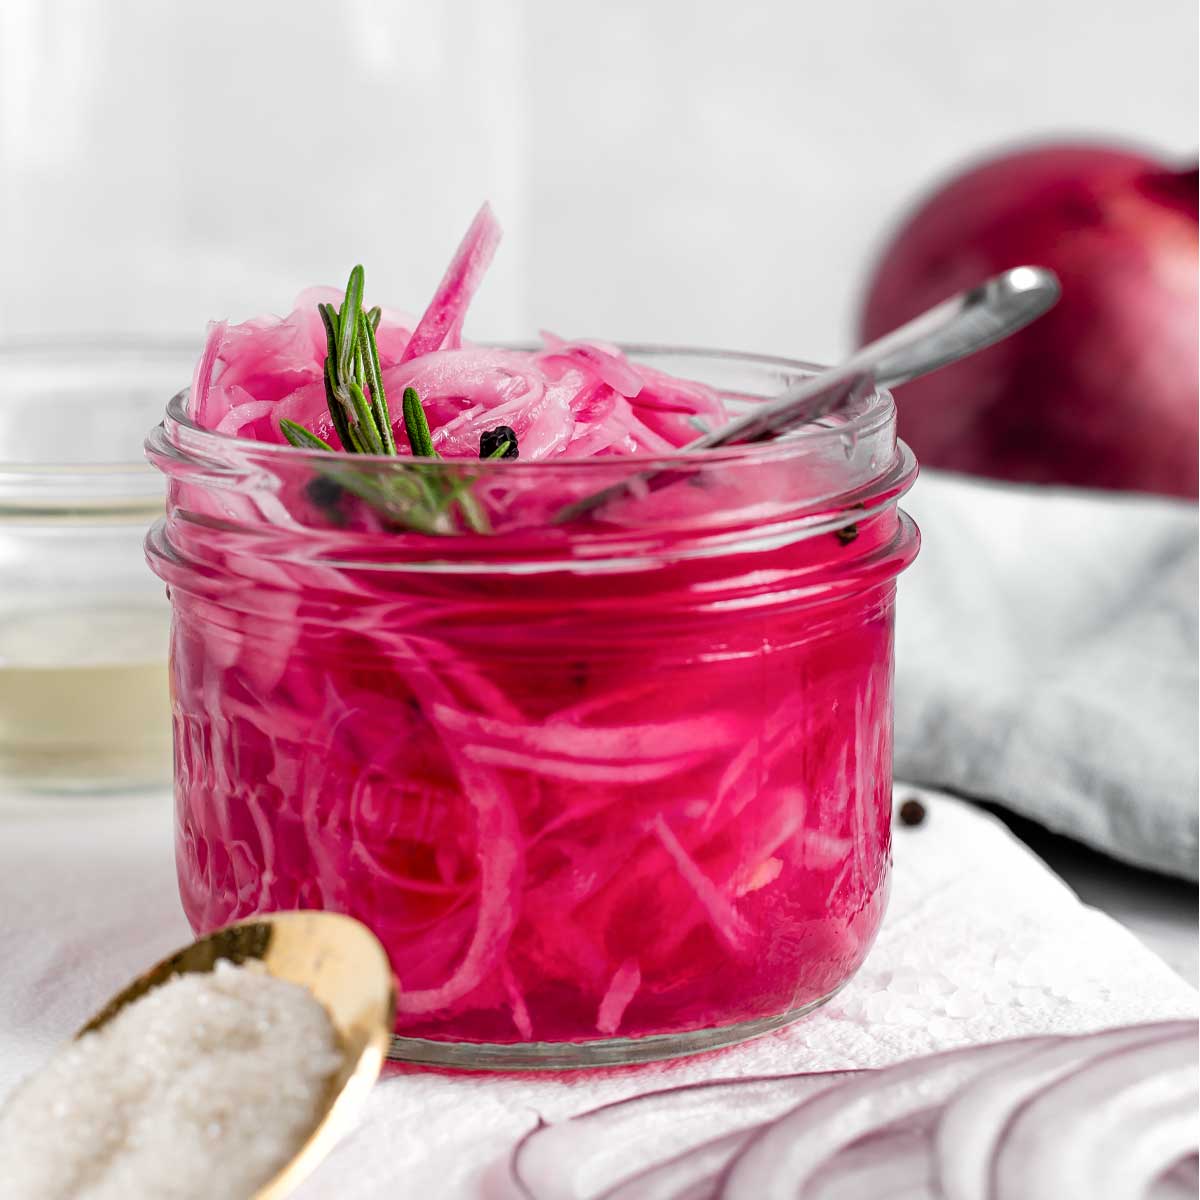 Pickled Red Onion Recipe